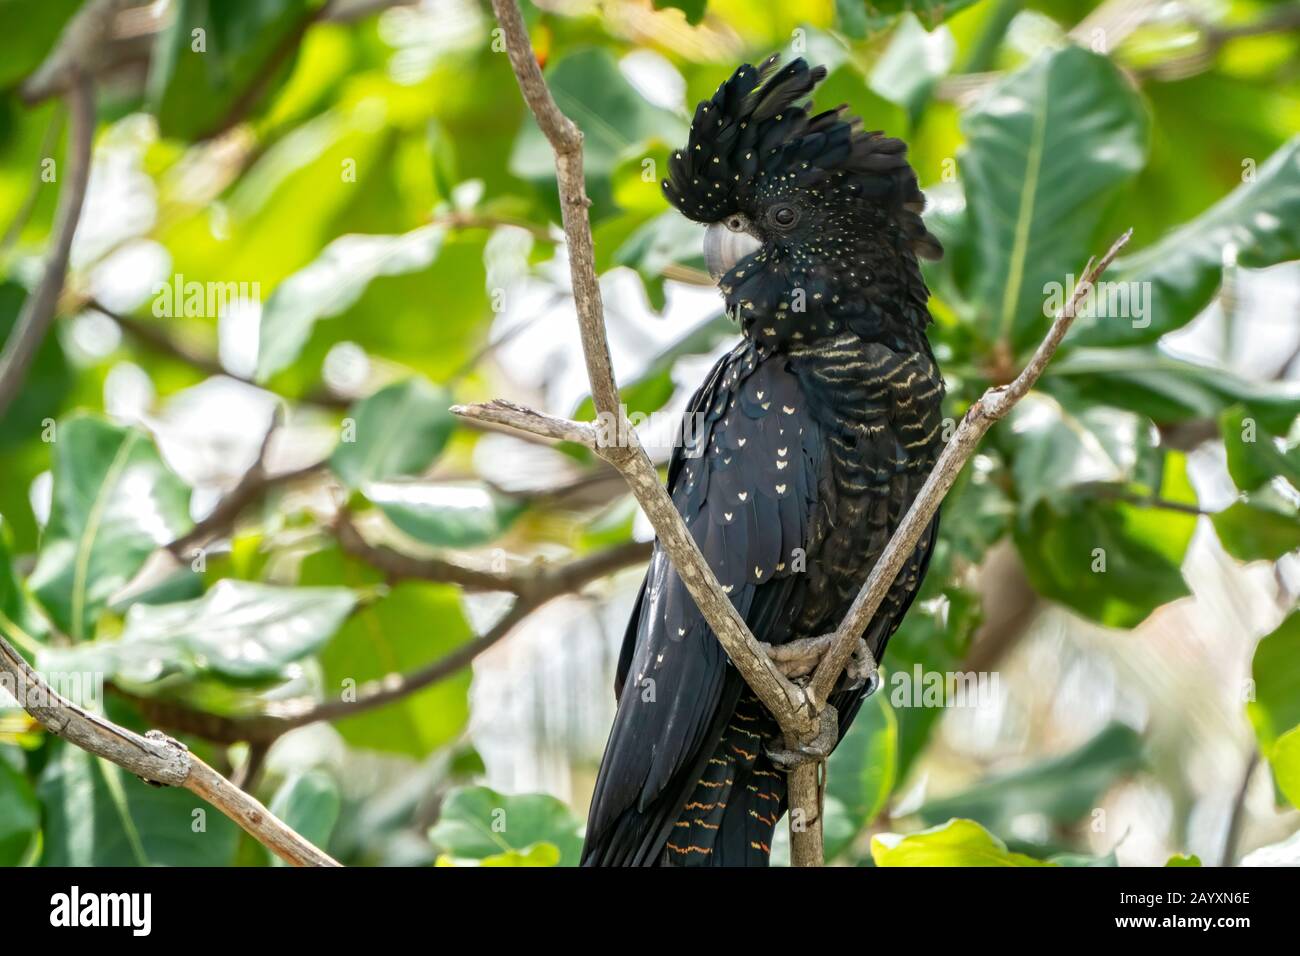 red-tailed black cockatoo, Calyptorhynchus banksii, close up of  bird perched in tree, Cairns, Queensland, Australia 7 January 2020 Stock Photo